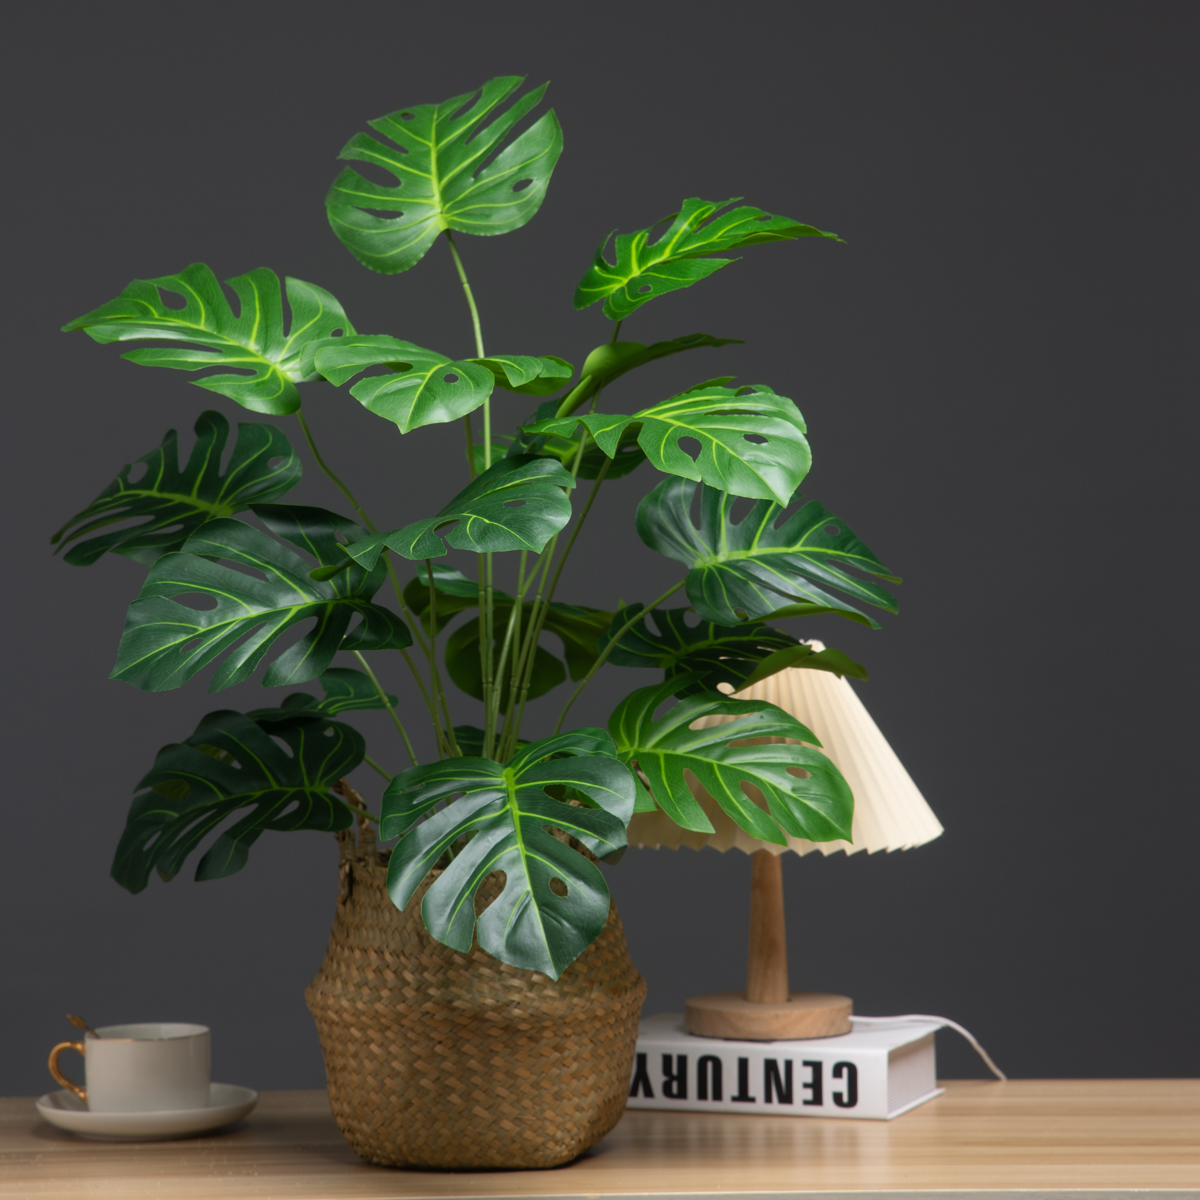 How to Choose the Right Artificial Plants for Your Office Space